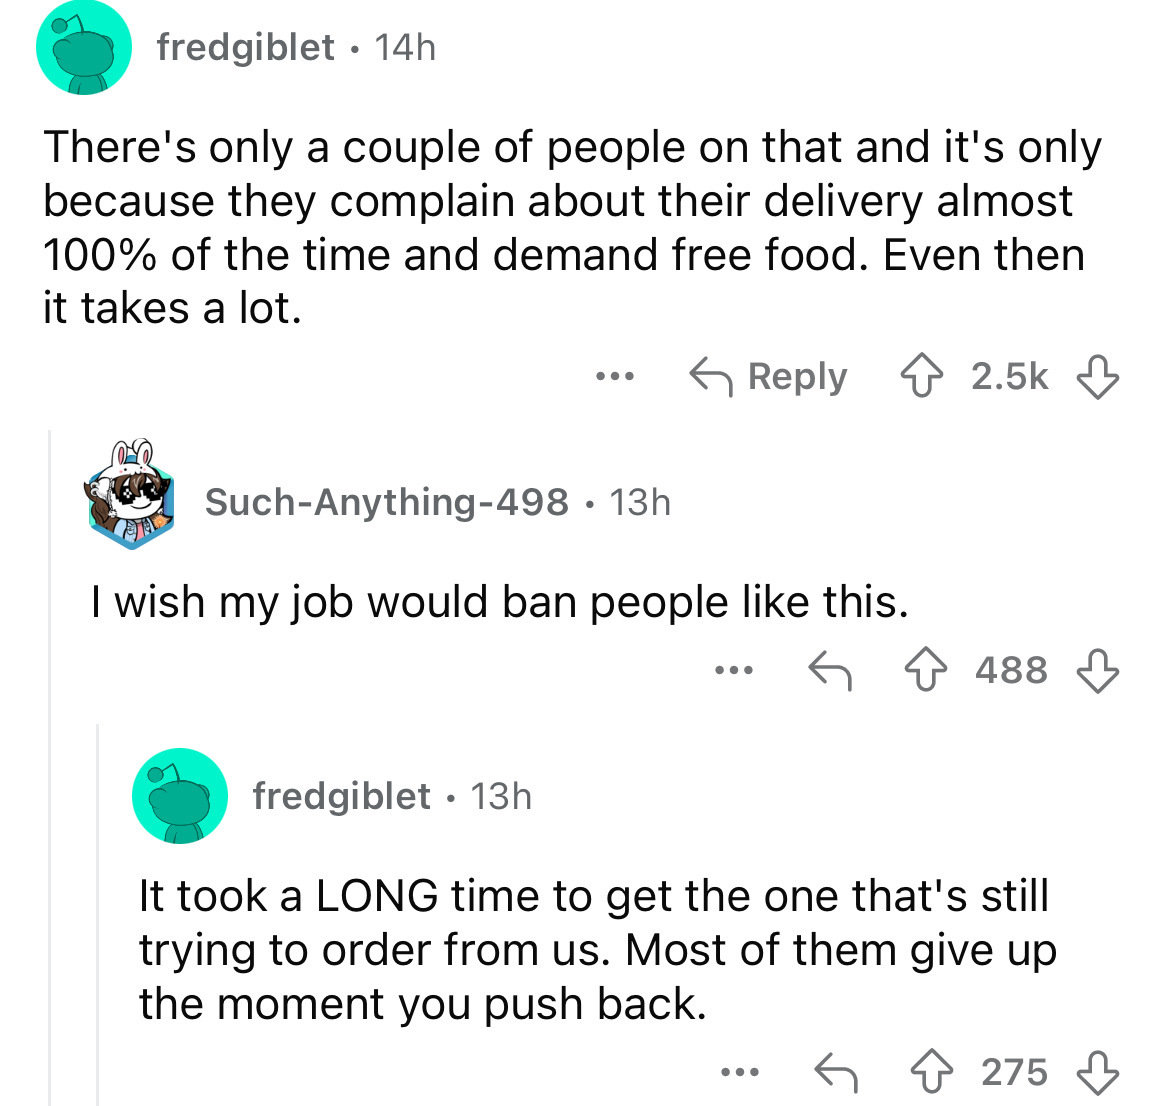 screenshot - fredgiblet 14h . There's only a couple of people on that and it's only because they complain about their delivery almost 100% of the time and demand free food. Even then it takes a lot. SuchAnything498 13h I wish my job would ban people this.